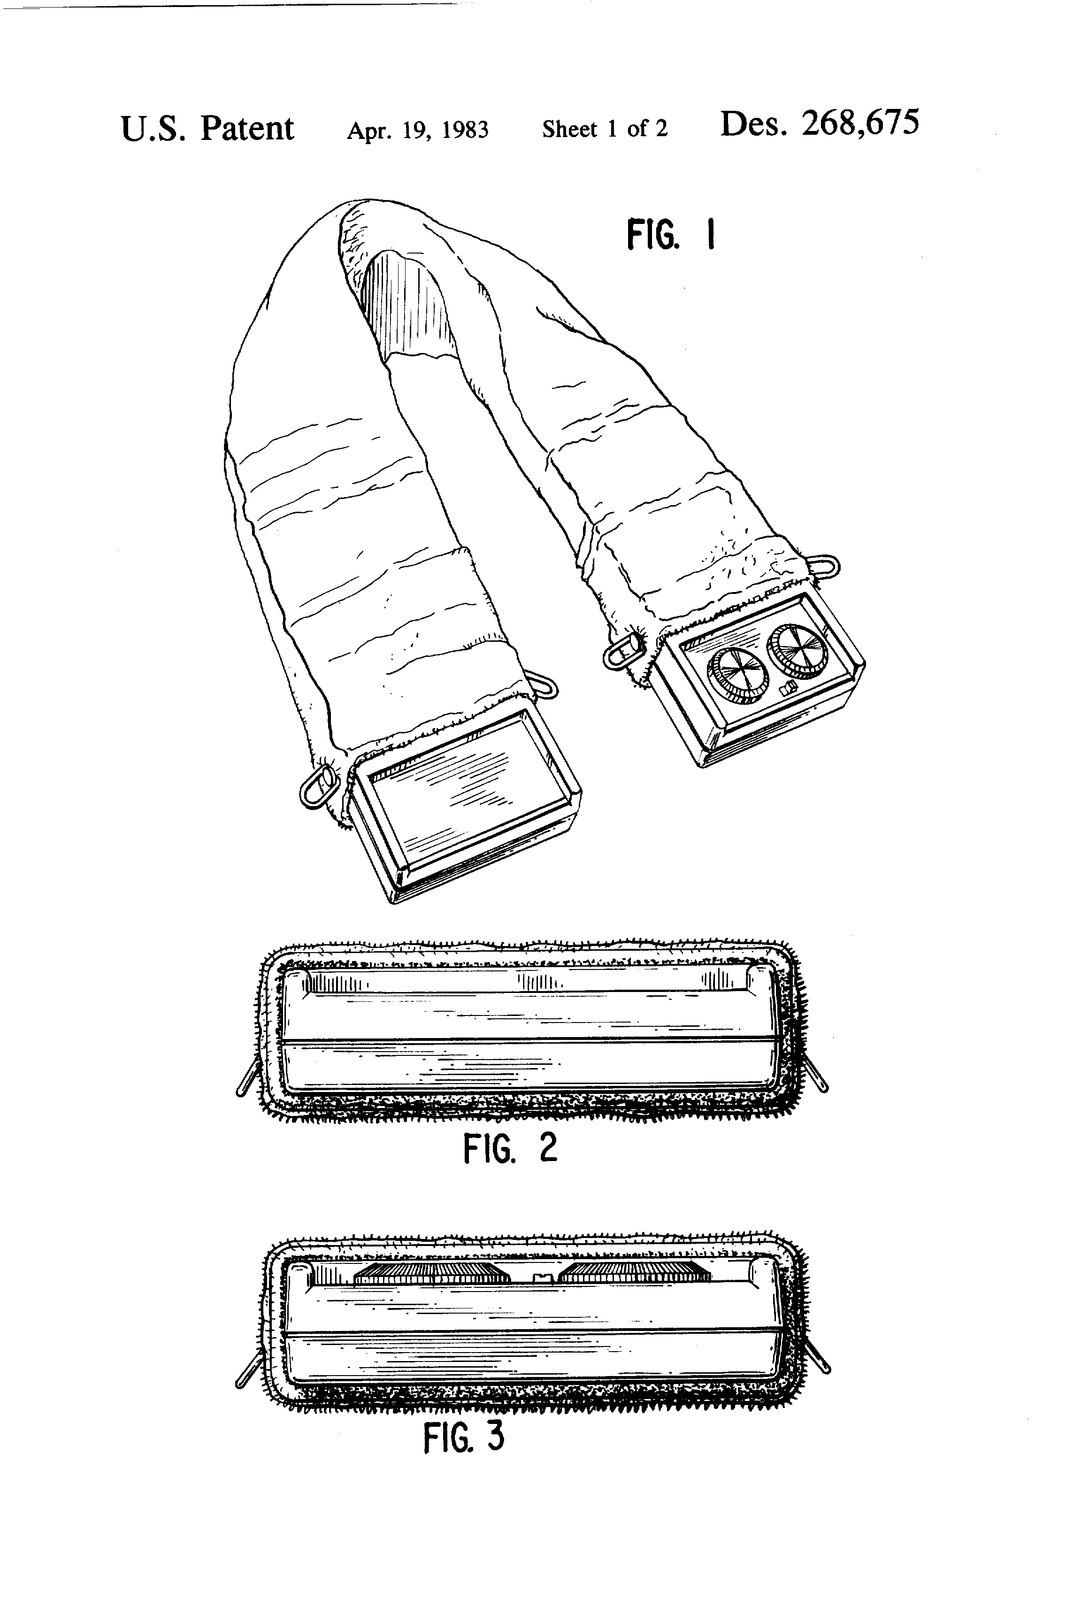 USD268675-1.png